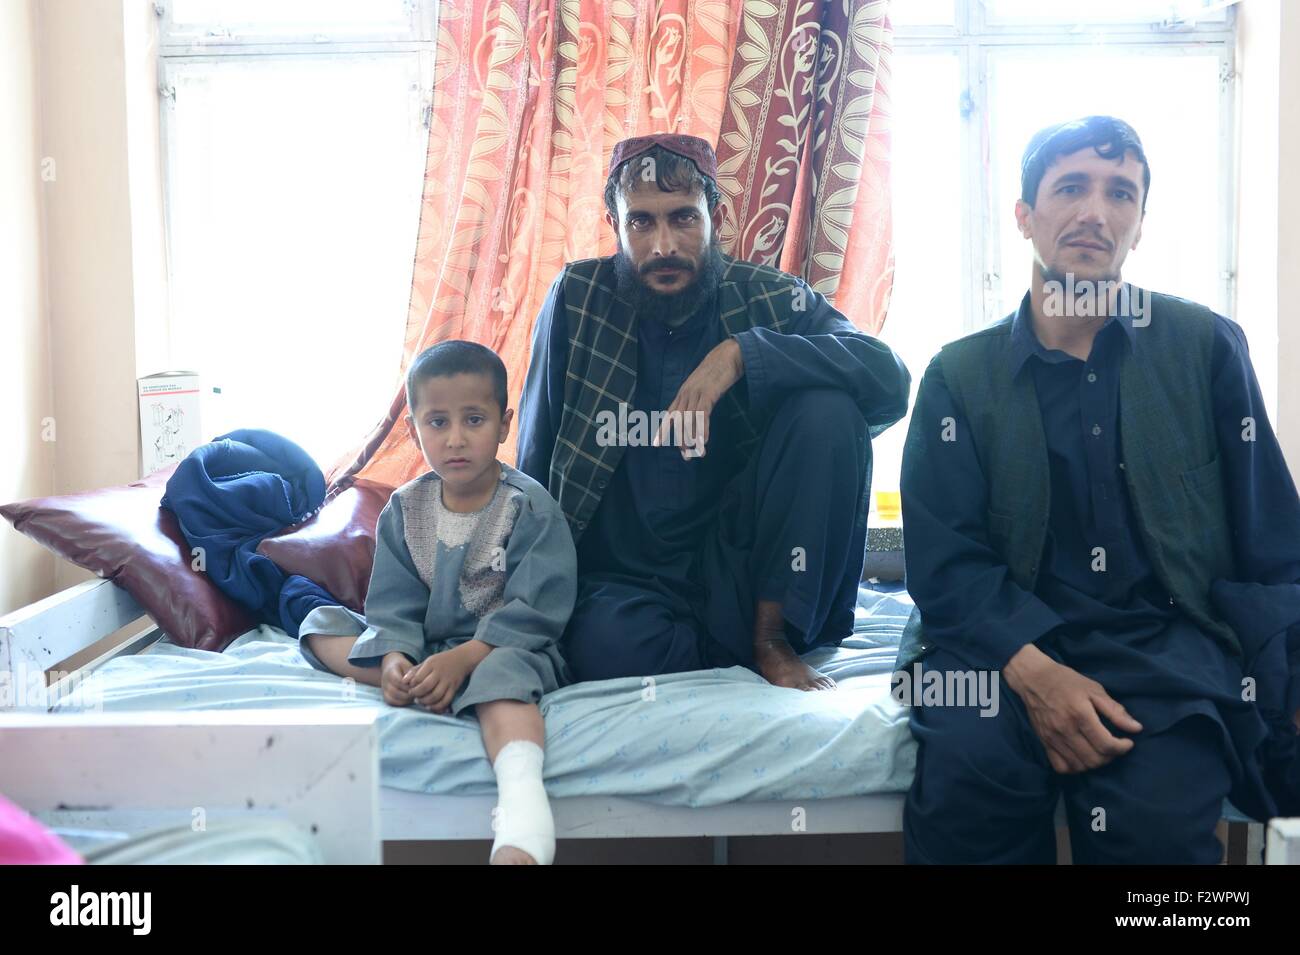 Kabul, Afghanistan. 06th Aug, 2015. Farmer Ahmad Zai (C), his younger brother and another family member at the Mirwais hospital in Kabul, Afghanistan, 06 August 2015. The boy was hit in the leg during a skirmish. Around 250,000 people received medical treatment at Mirwais hospital in 2014. Photo: Subel Bhandari/dpa/Alamy Live News Stock Photo